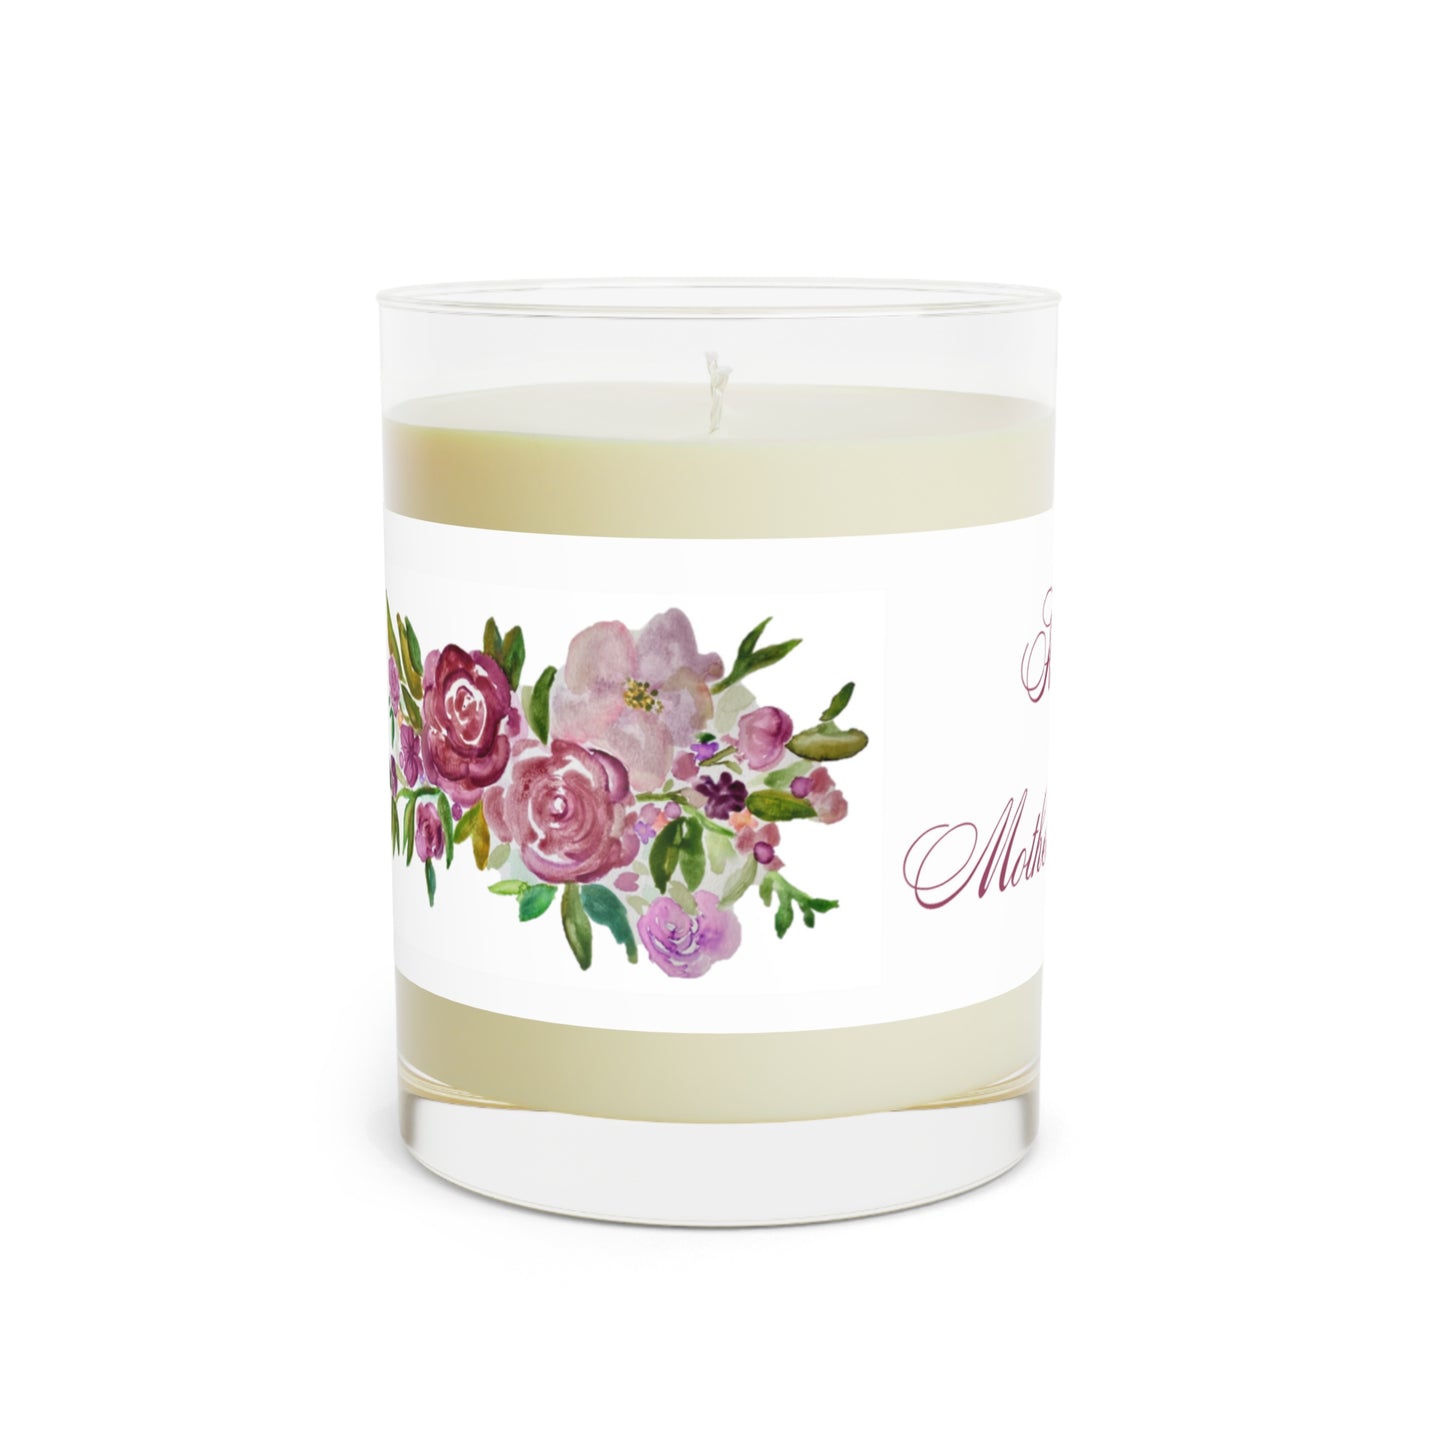 Wing Light Art Designs Mother's Day Floral Scented Candle - Full Glass, 11oz